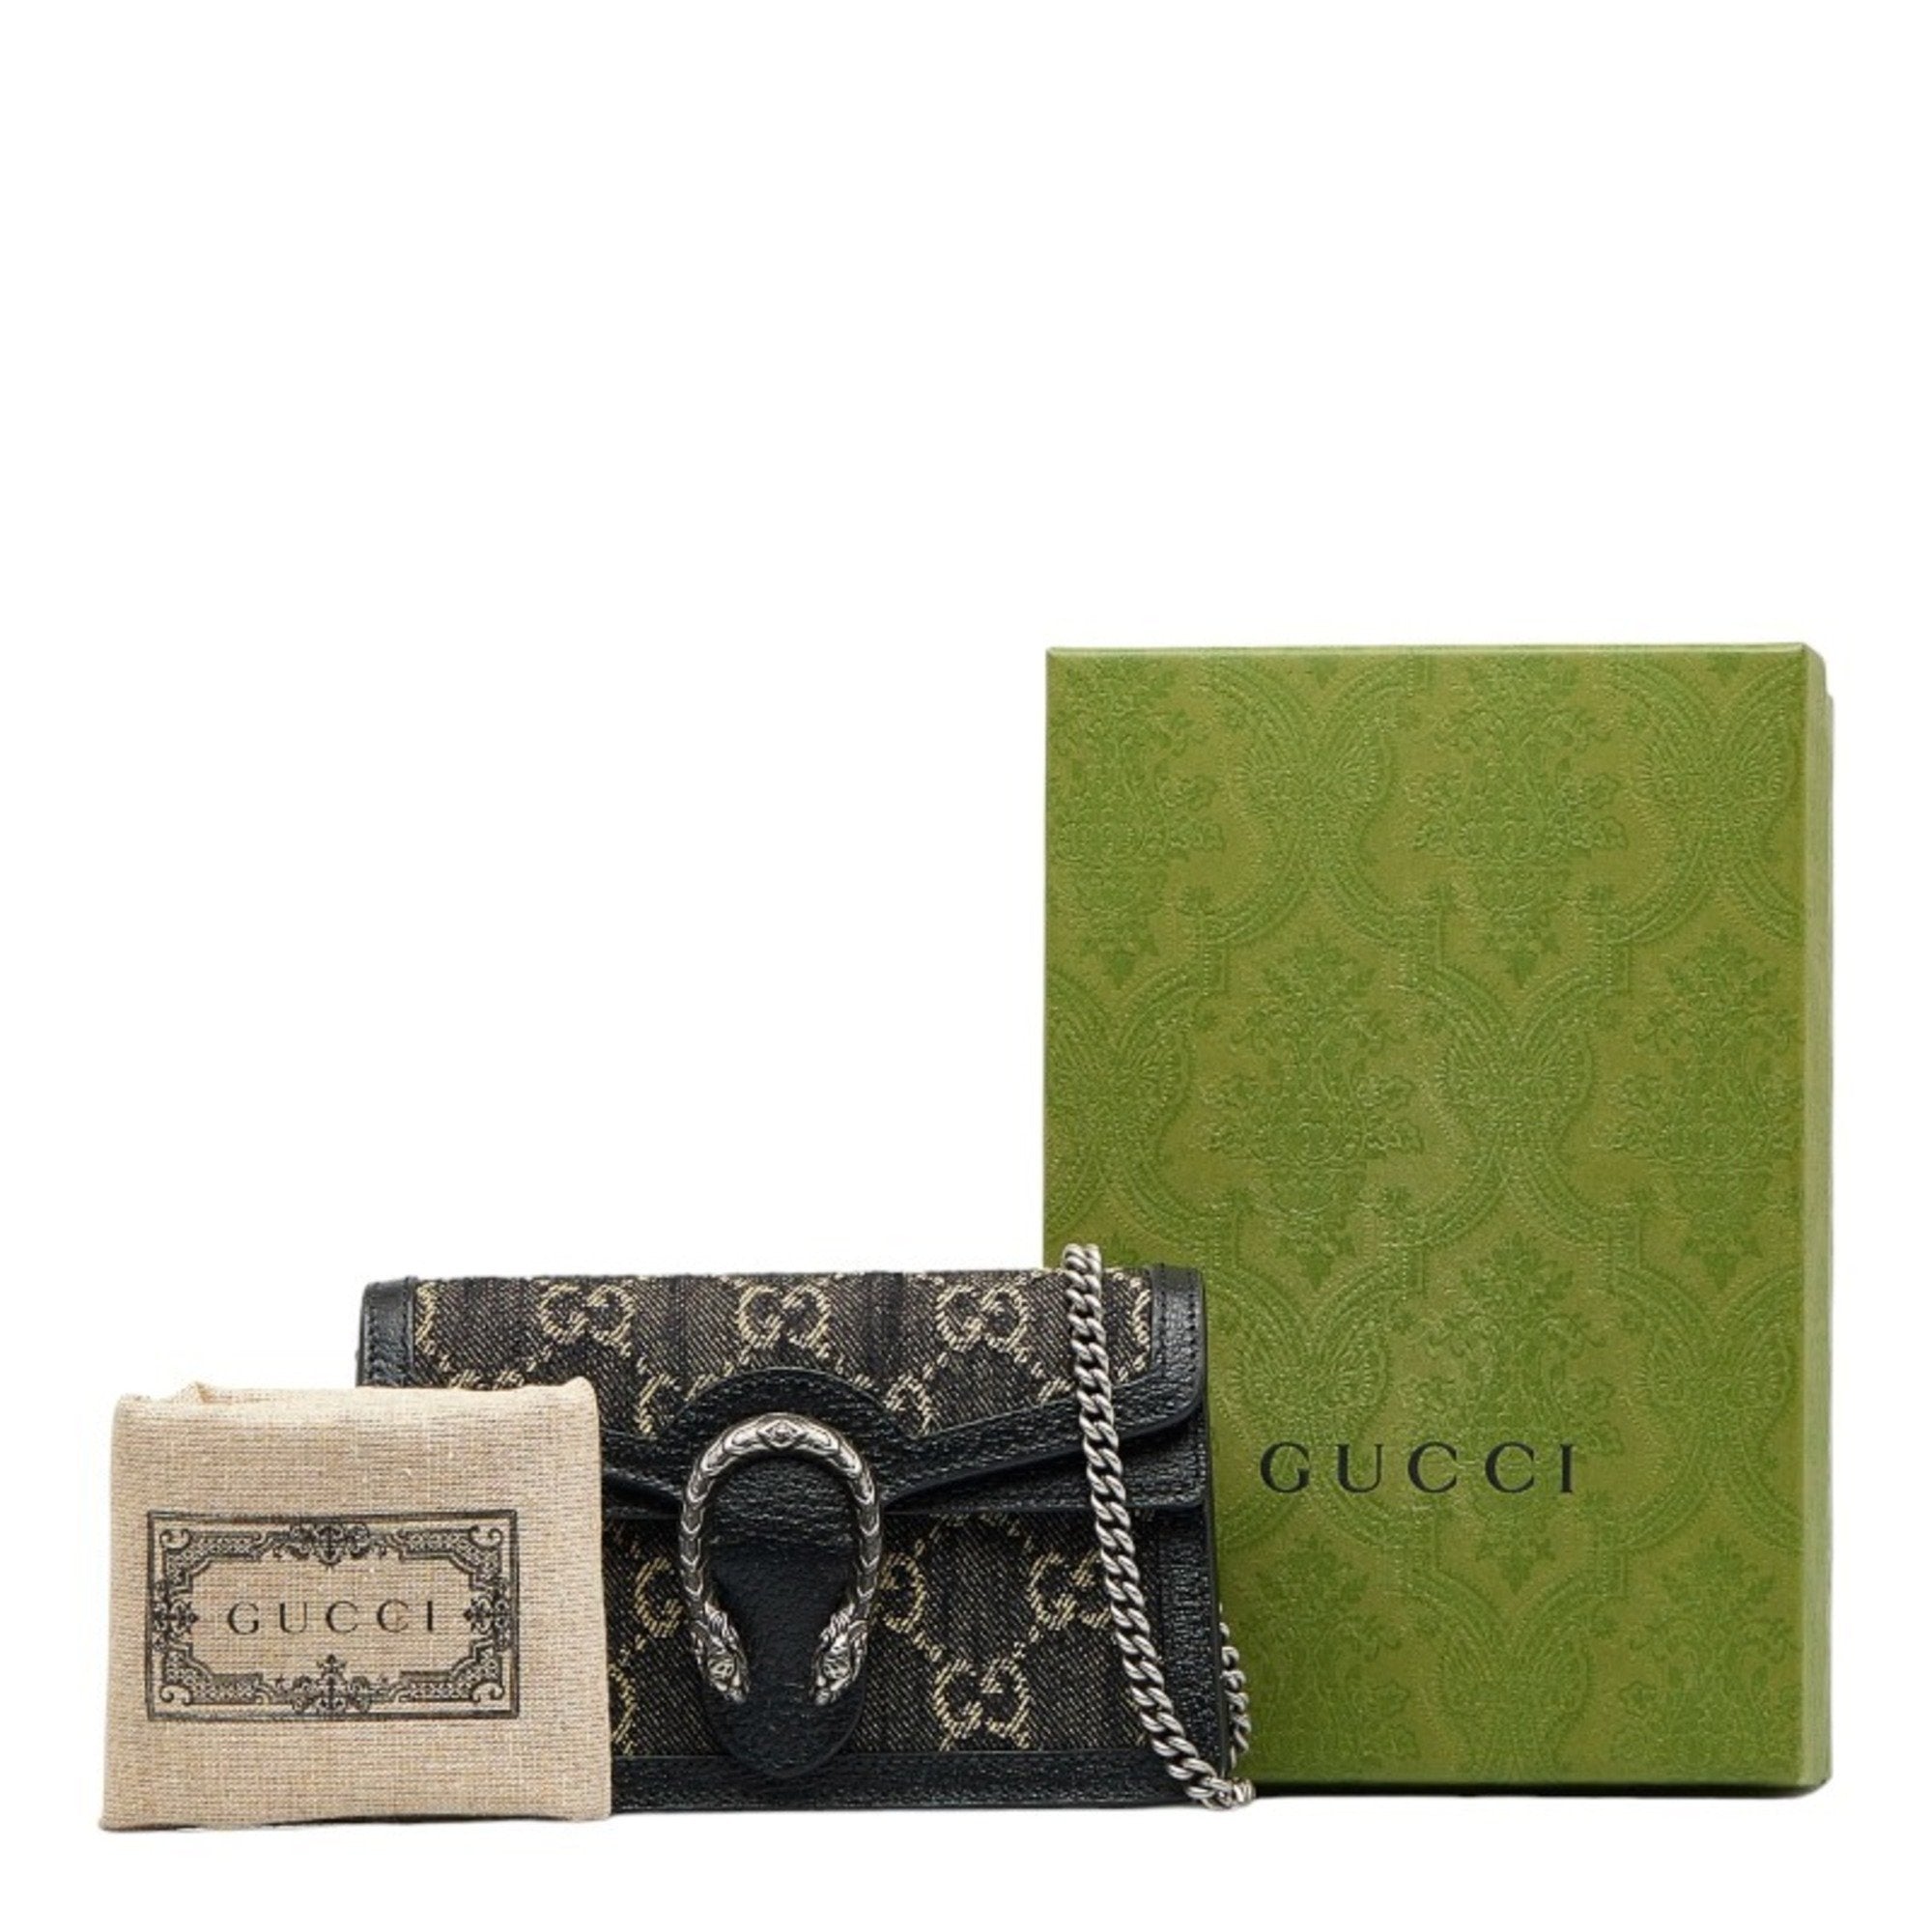 Gucci Women Gg Supreme Snake Patch Clutch (18 240 UAH) ❤ liked on Polyvore  featuring bags, handb… | Animal print handbags, Animal print clutches,  Embellished clutch